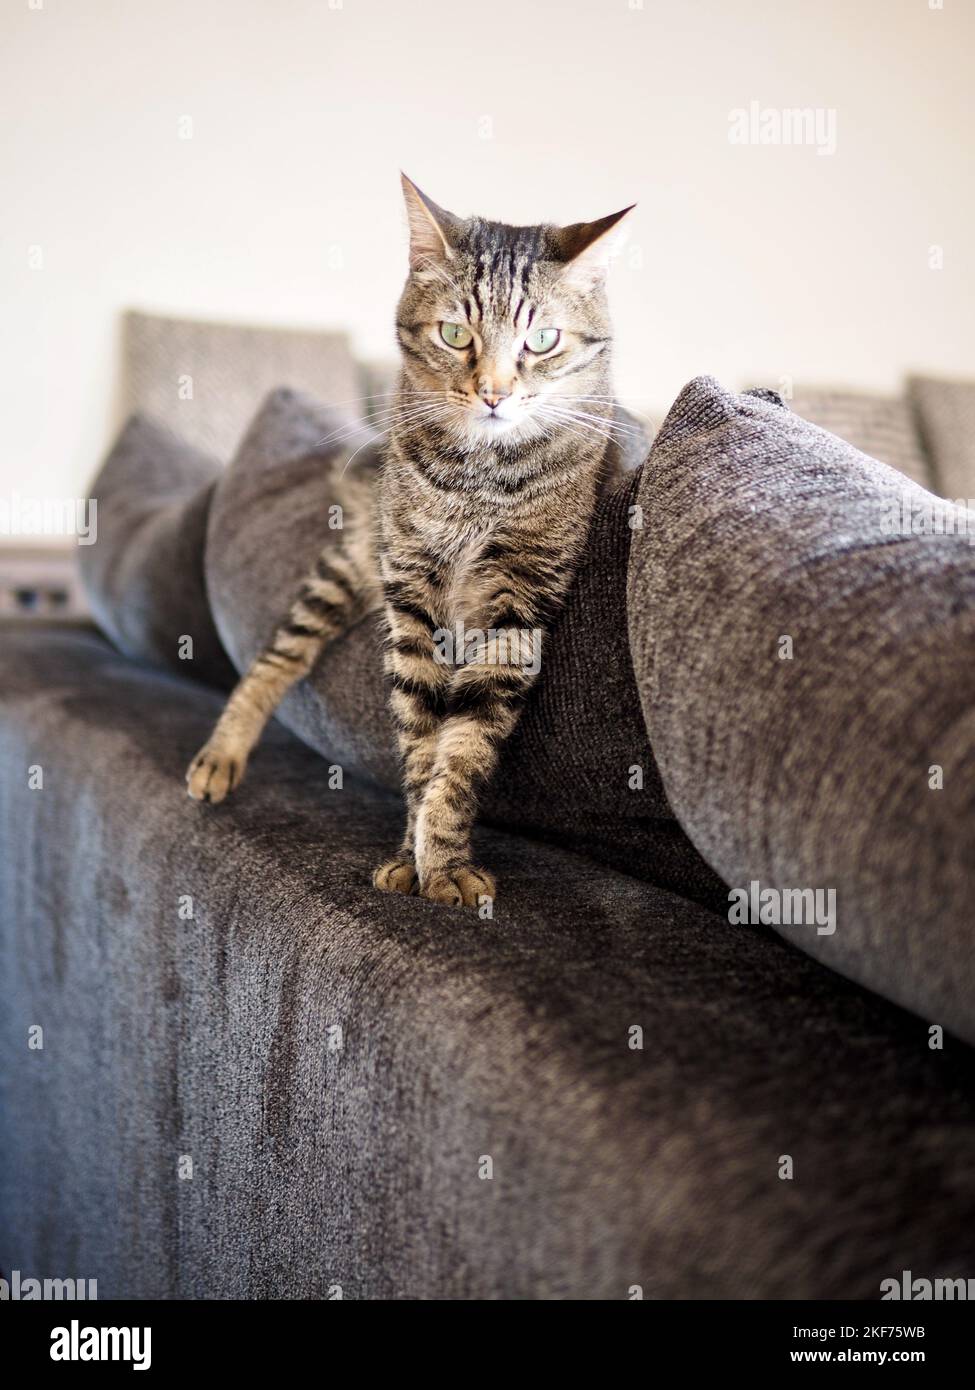 Morphy il tabby Foto Stock